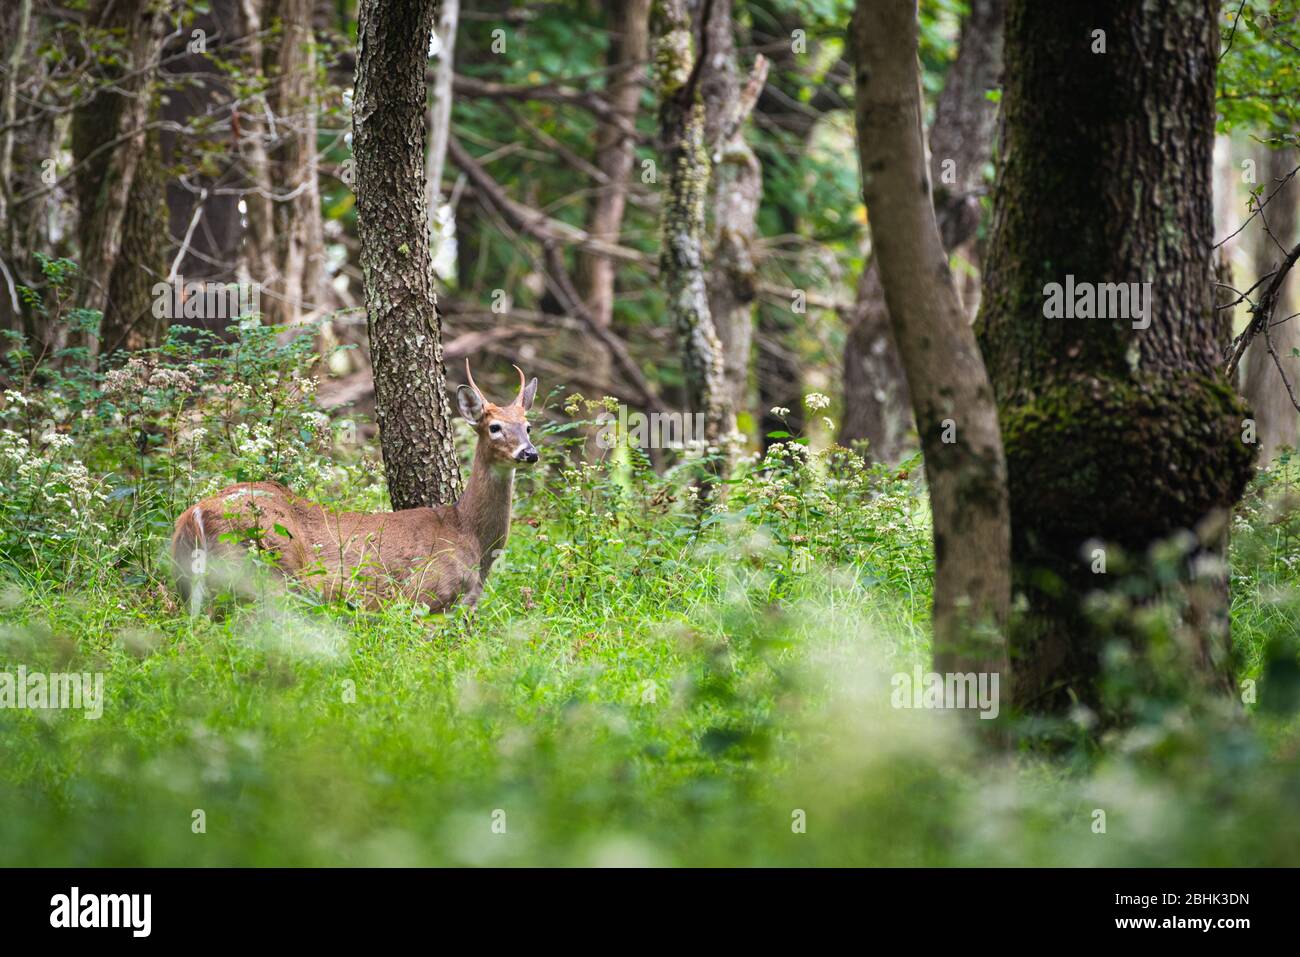 A young spiked buck stands among a lush green forest and large trees. Stock Photo